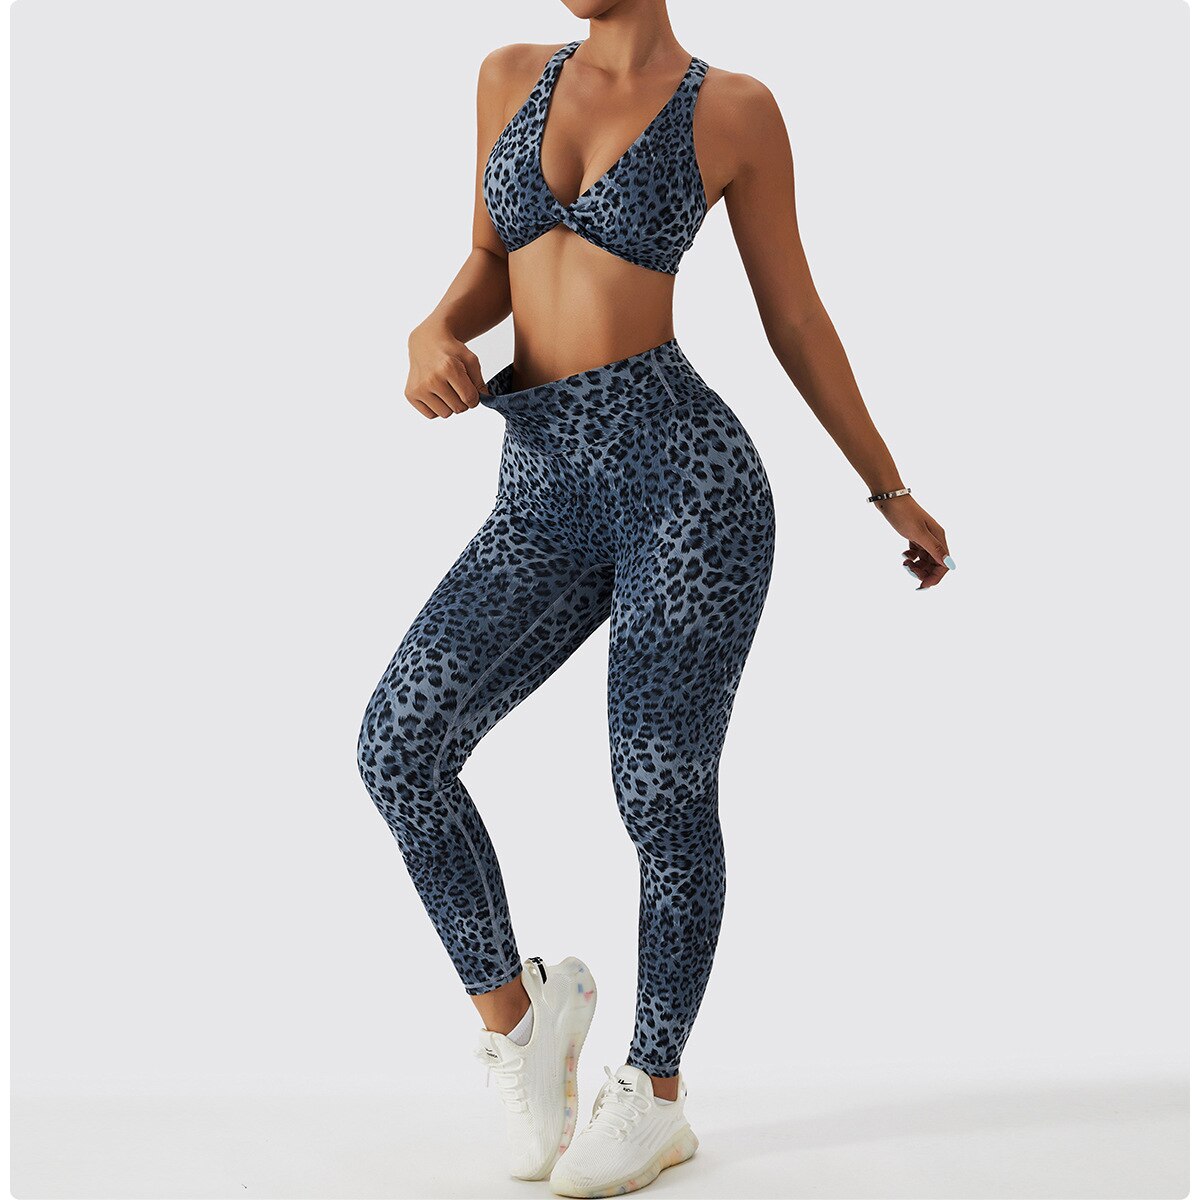 Leopard-Yoga-Clothing-Sets-Women-High-Waist-Leggings-And-Top-Two-Piece-Set-Seamless-Tracksuit-Fitness-1